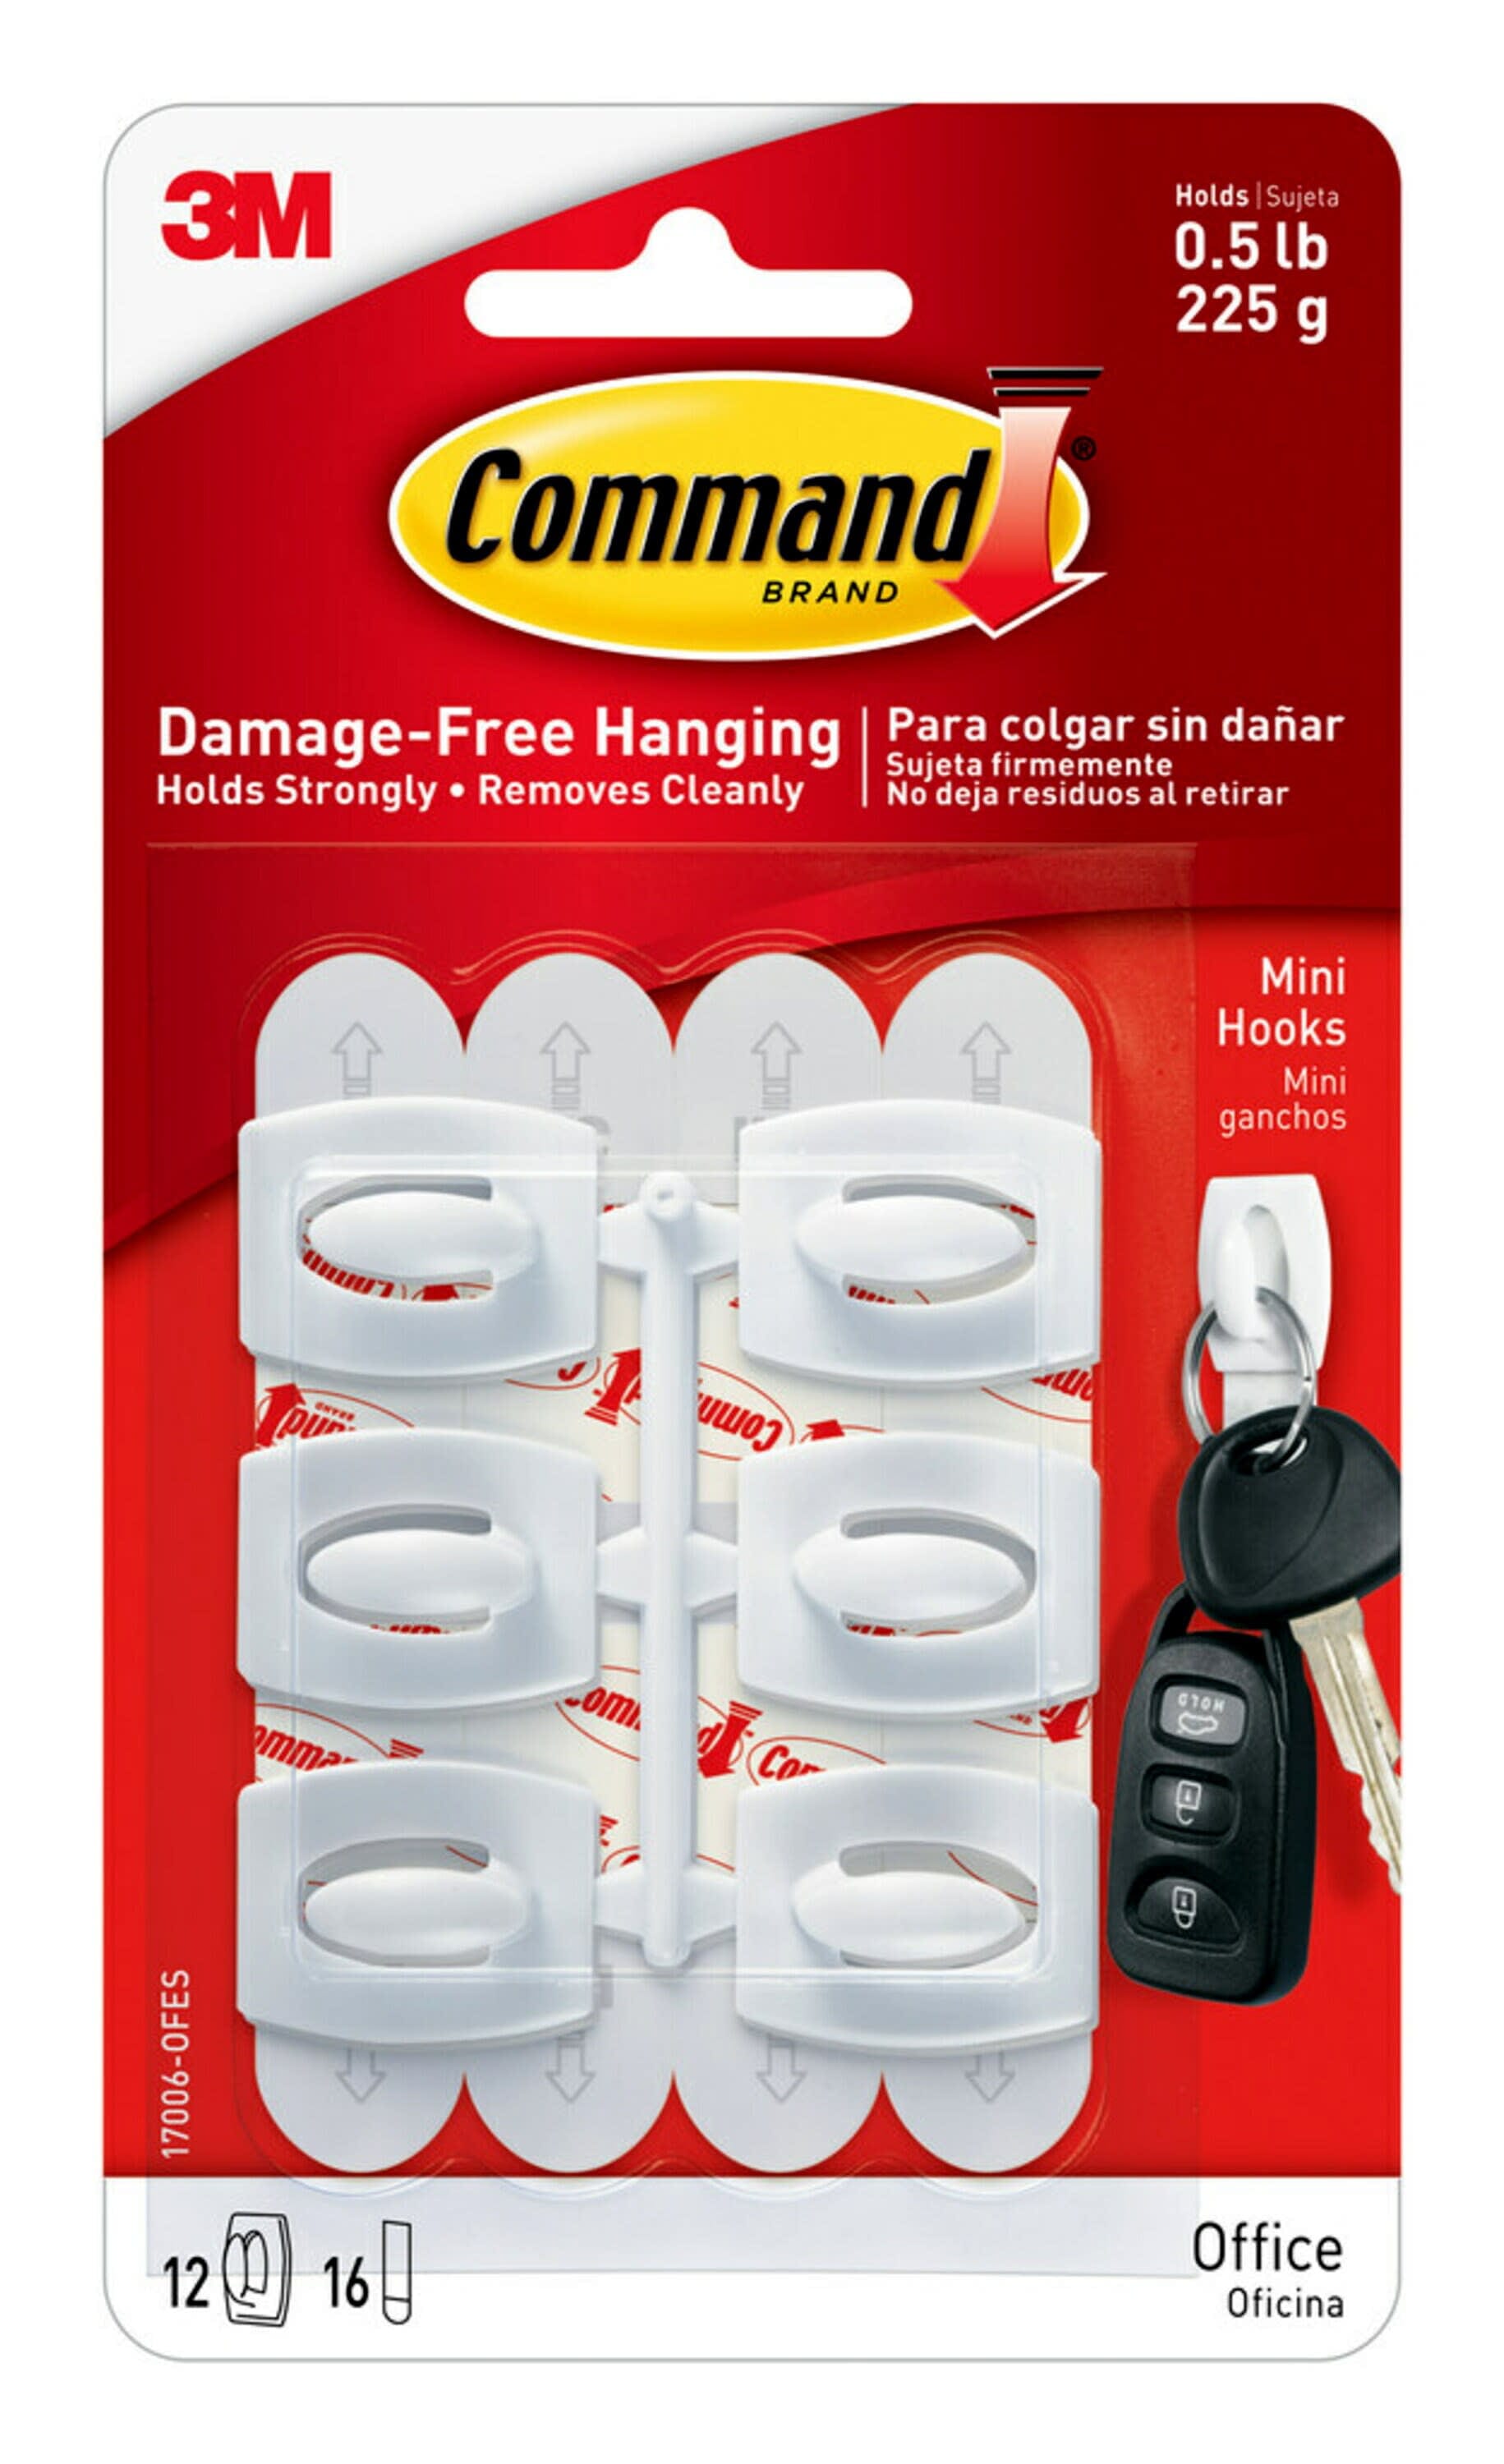 OOK Professional Picture Hanger, 100 lb